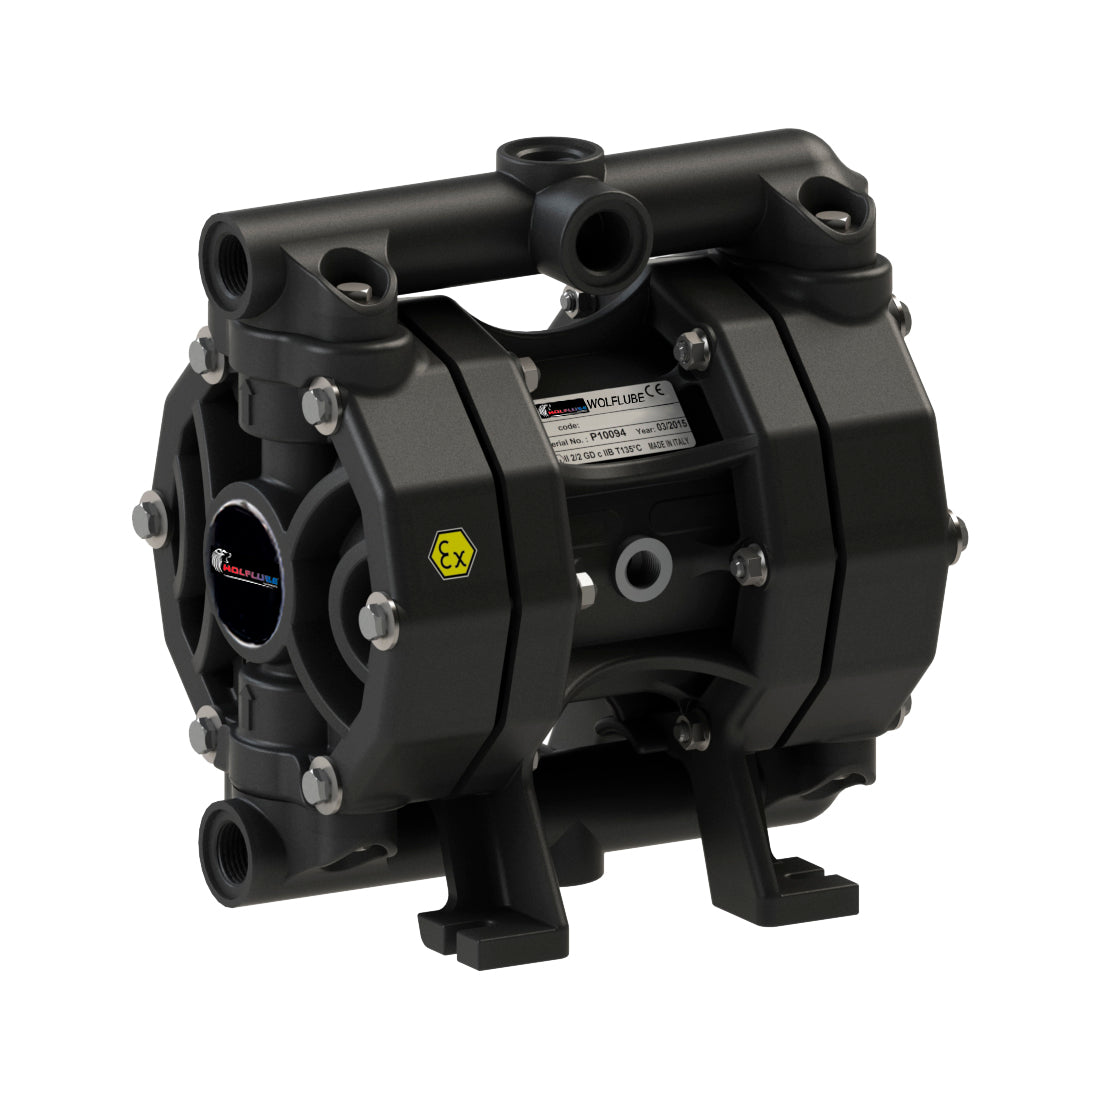 Wolflube Diaphragm Pump - Polypropylene - 1/2'' - for Oil and Diesel - Free Flow Rate 14.5 GPM